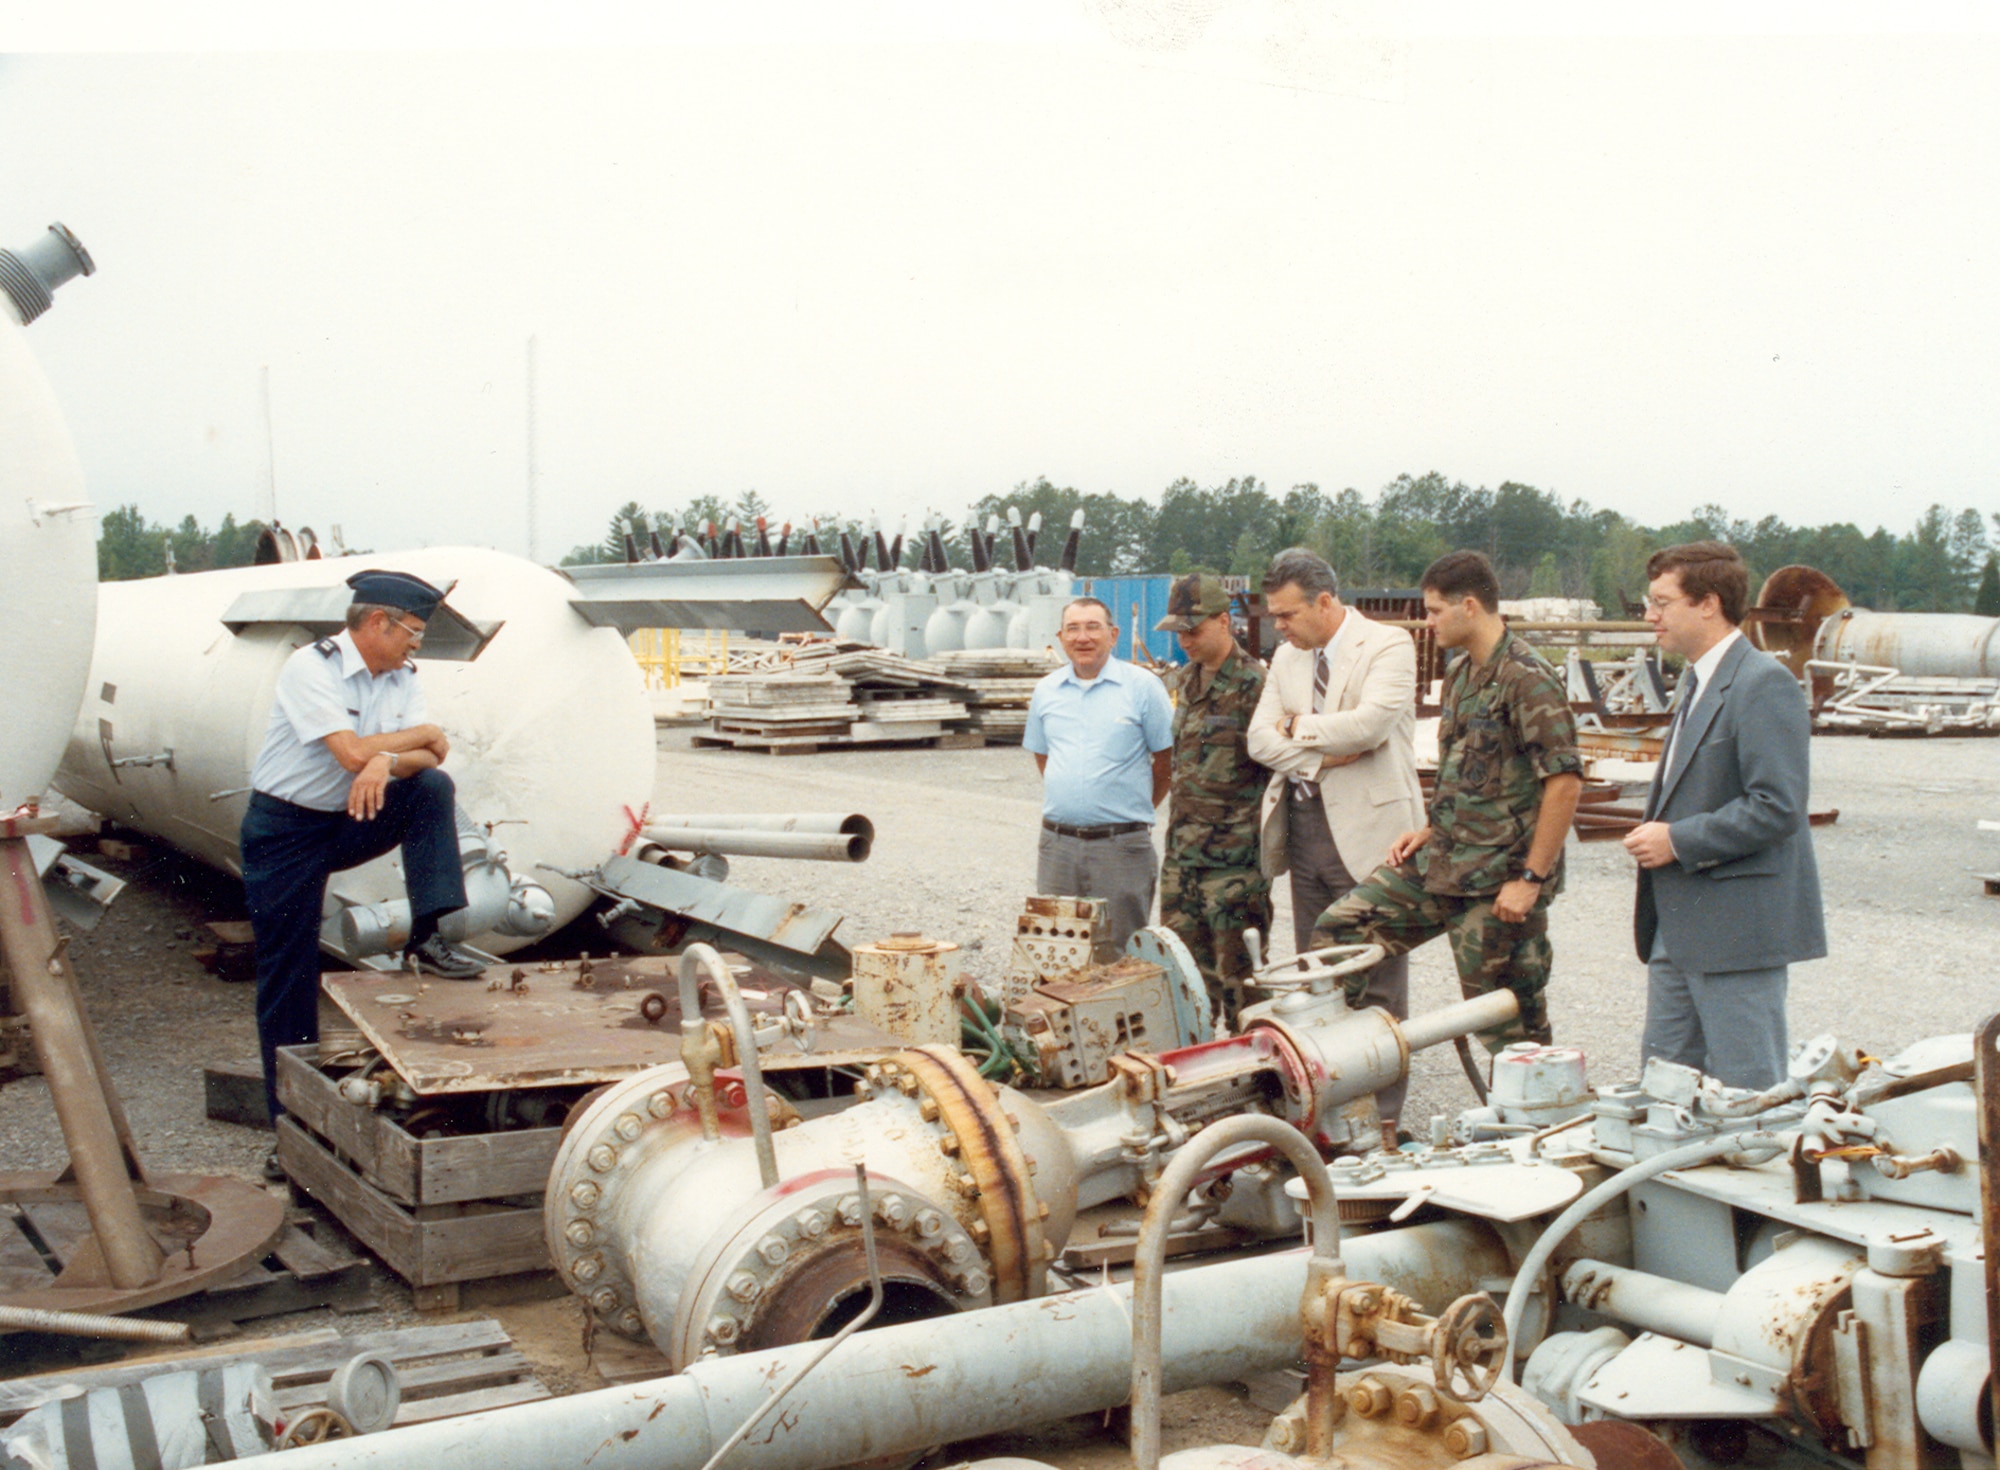 Dale Bradley, third from right, joins others at Arnold Air Force Base, Tenn., in inspecting cryogenic hardware acquired by Arnold Engineering Development Complex from the NASA Lewis Research Center in the early 1990s. The resurrection of the cryogenic capability at Arnold was among the numerous projects with which Bradley was involved during his 33-year career at Arnold. (U.S. Air Force photo)